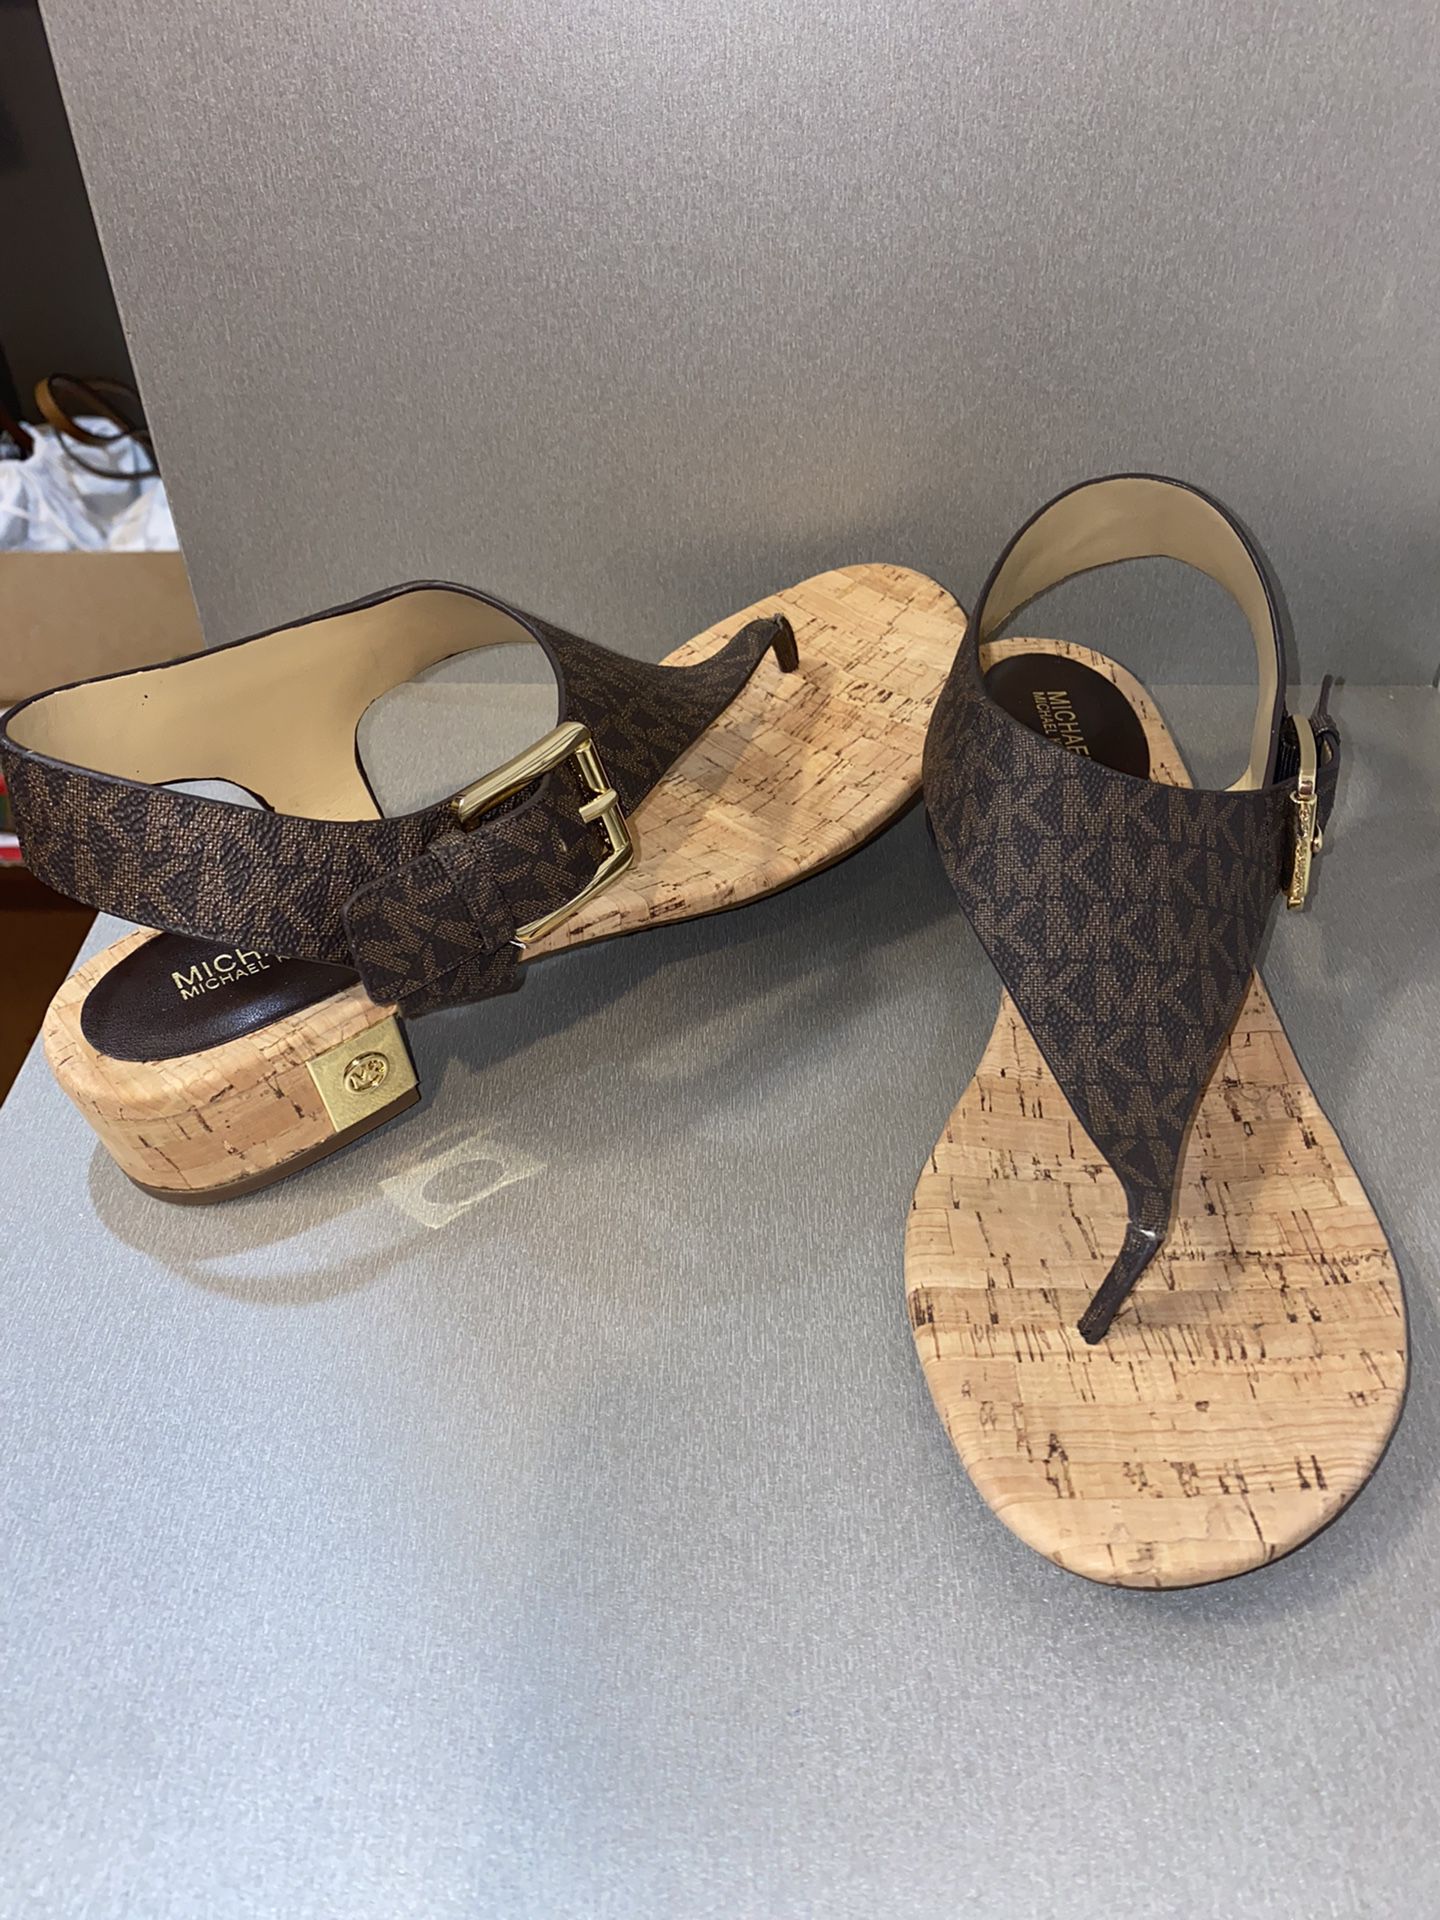 Women Shoes Louis Vuitton Size 7 for Sale in Lake Worth, FL - OfferUp